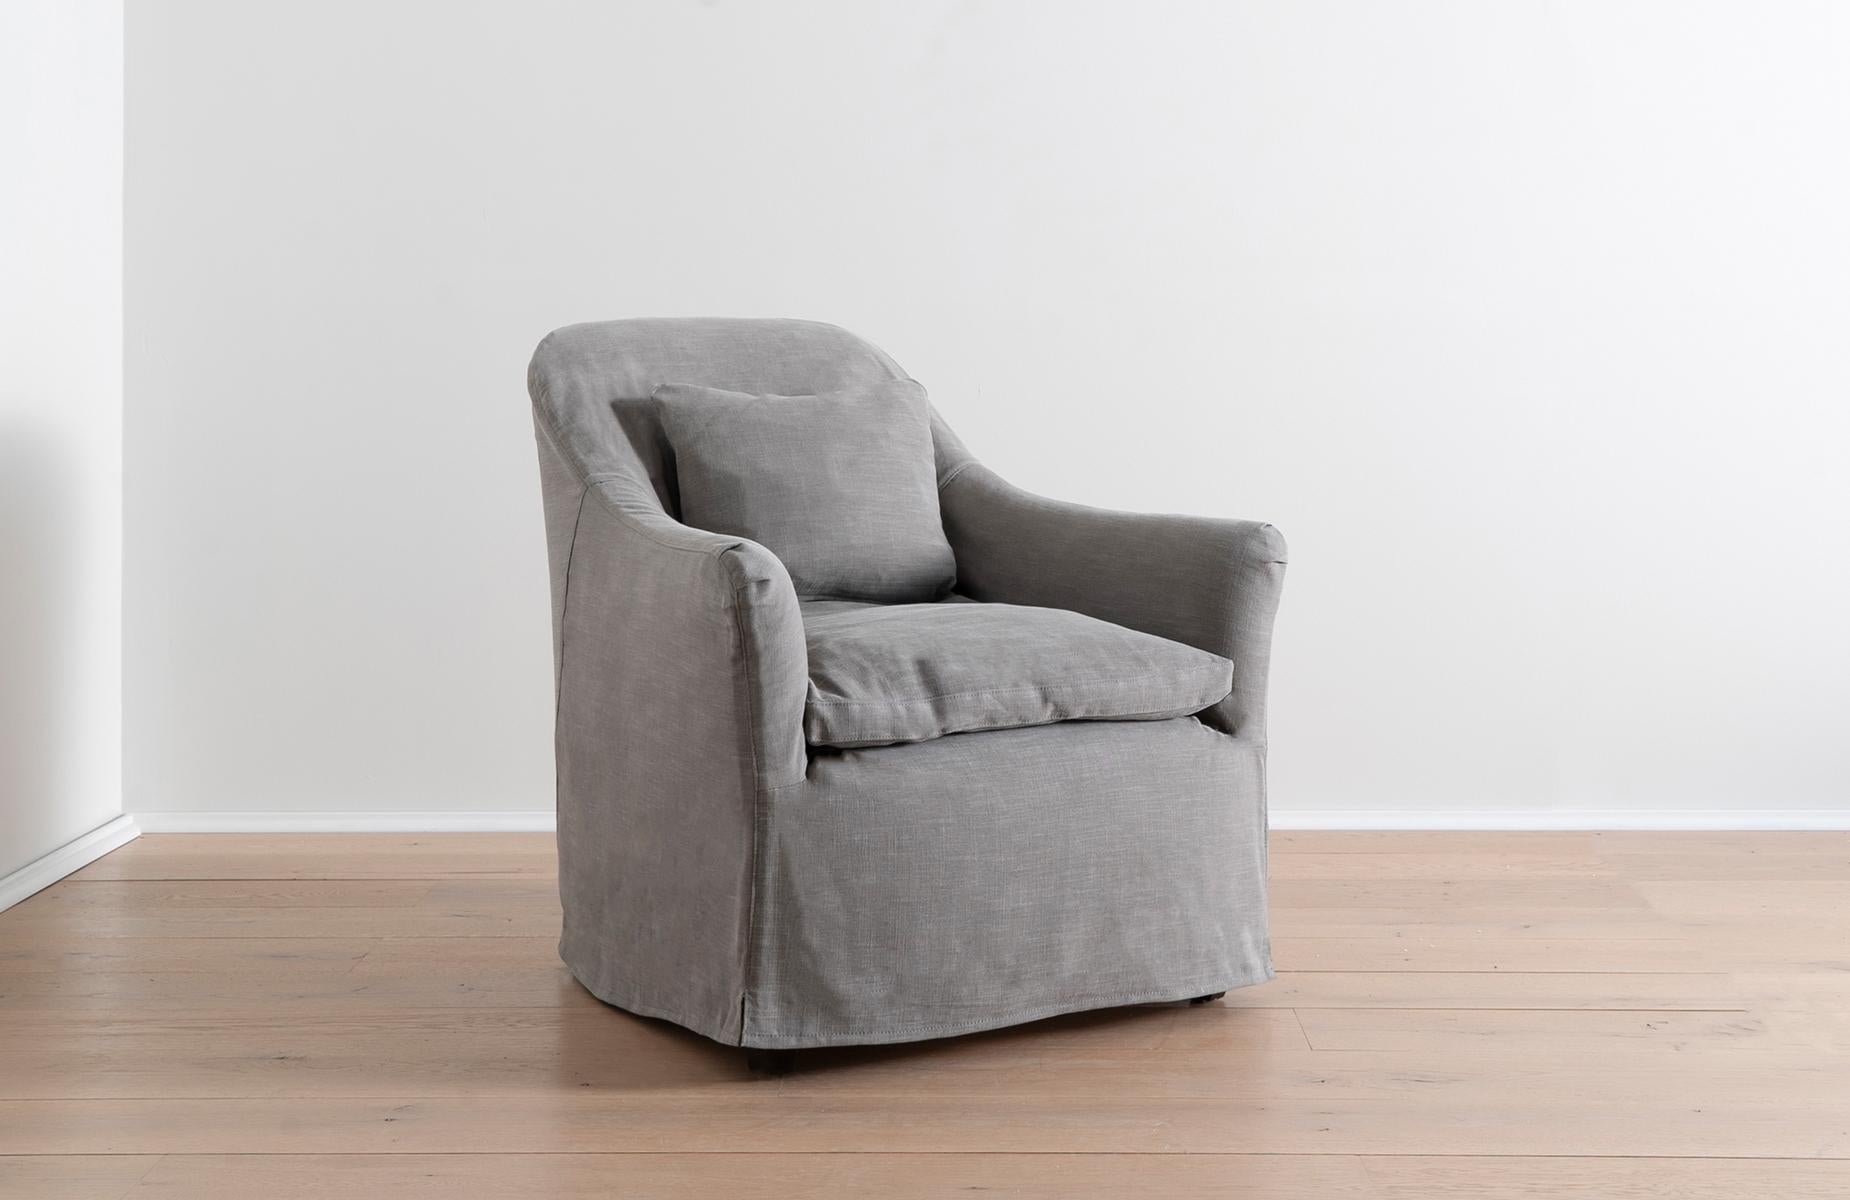 The Cisco Brothers slipcovered Hazel Mini Chair in Molino Fog organic cotton combines comfort, quality craftsmanship, and durable, eco-friendly manufacturing to result in a stylish organic modern lounge chair for your living room. Cisco is